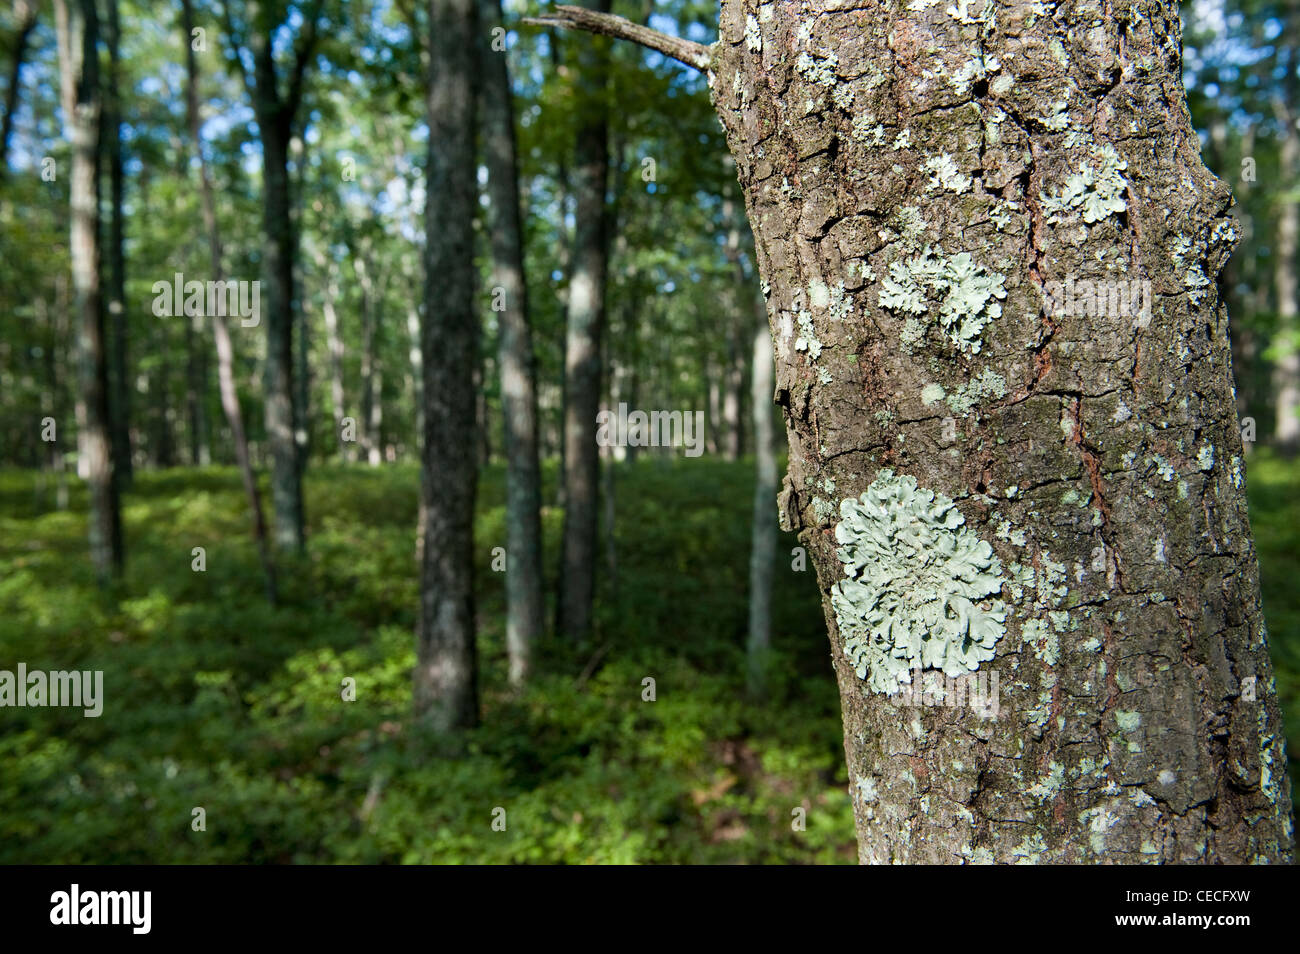 Oak trunk with lichen on in deciduous woodland habitat in the Ponocos area of Pennsylvania, USA. Stock Photo